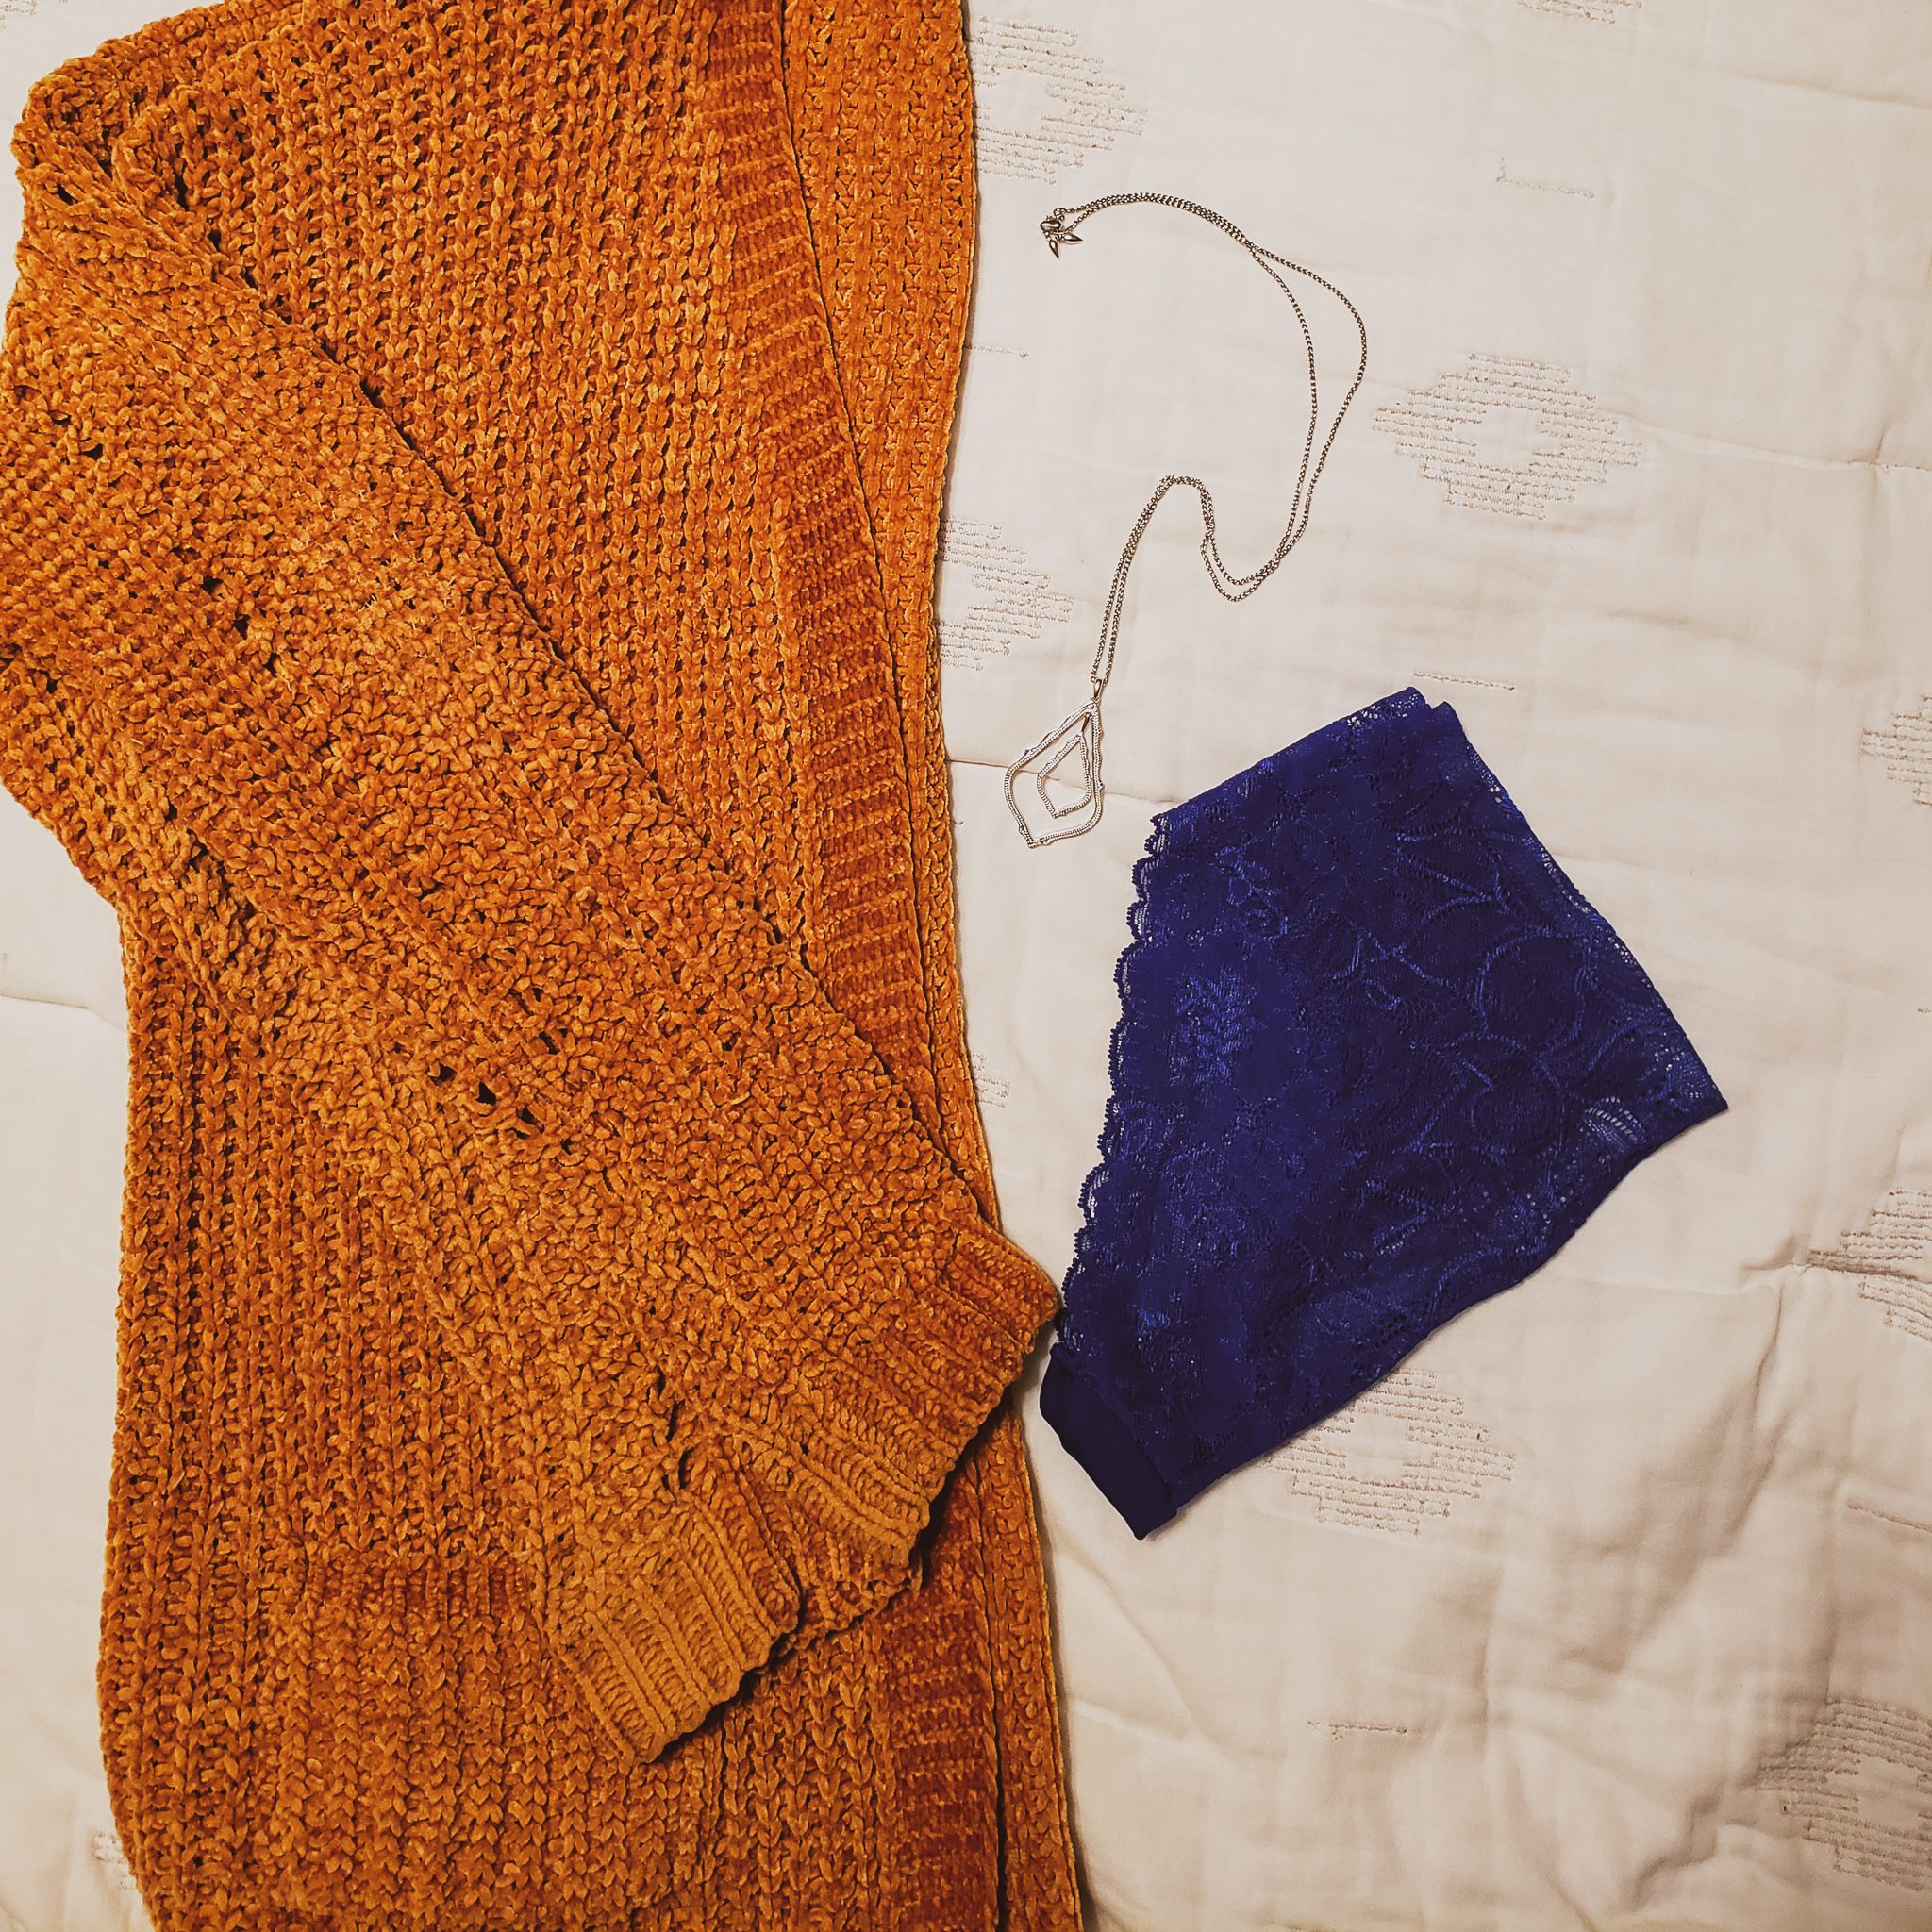 outfit example - yellow sweater and blue underwear